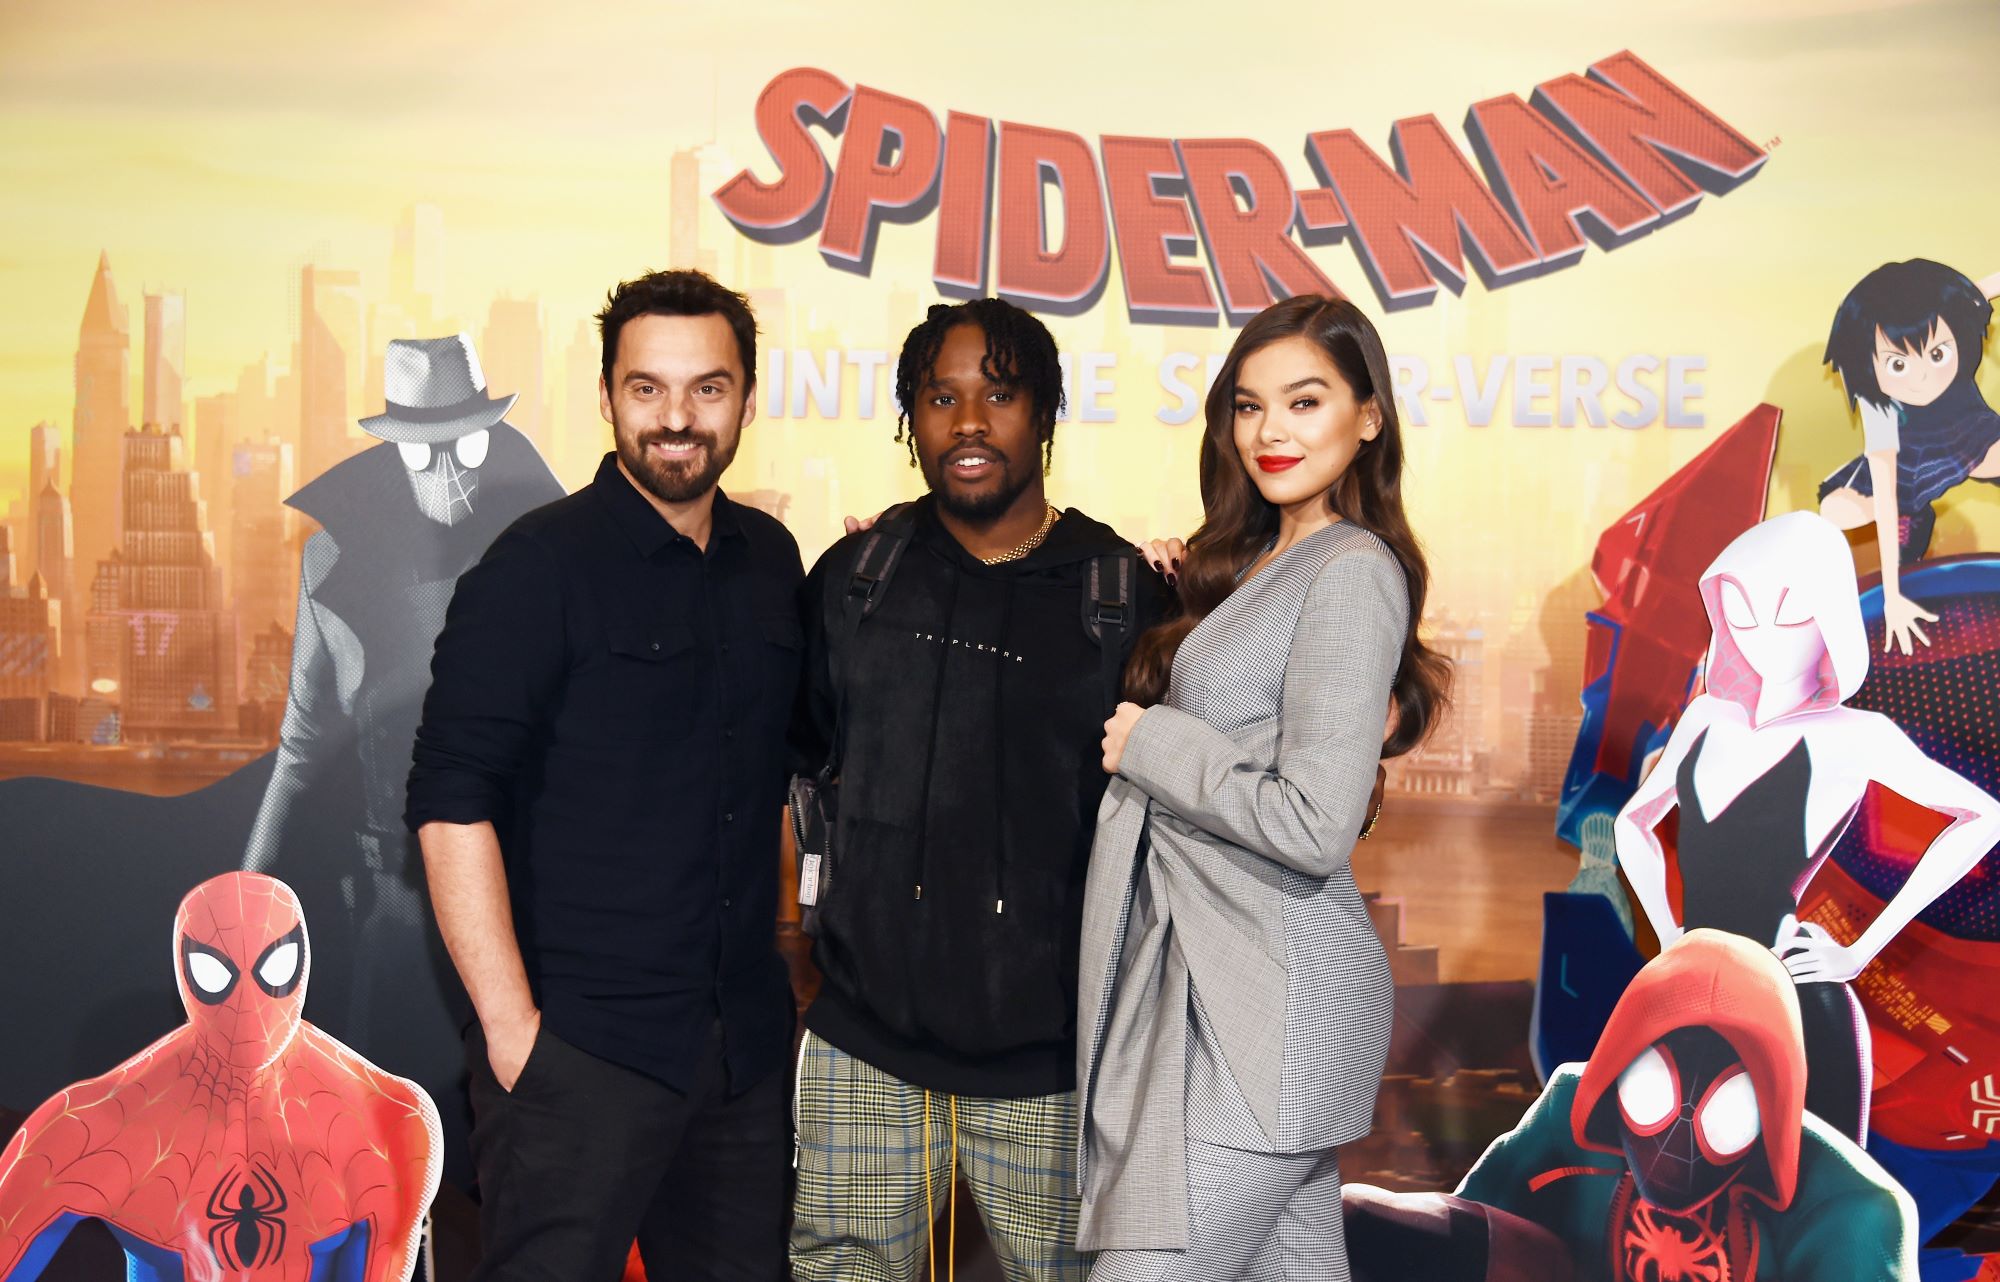 'Spider-Man: Across the Spider-Verse' stars Jake Johnson, Shameik Moore, and Hailee Steinfeld pose for a photo together. Johnson wears a black button-up long-sleeved shirt and black pants. Moore wears a black hoodie and plaid pants. Steinfeld wears a gray suit and gray pants.